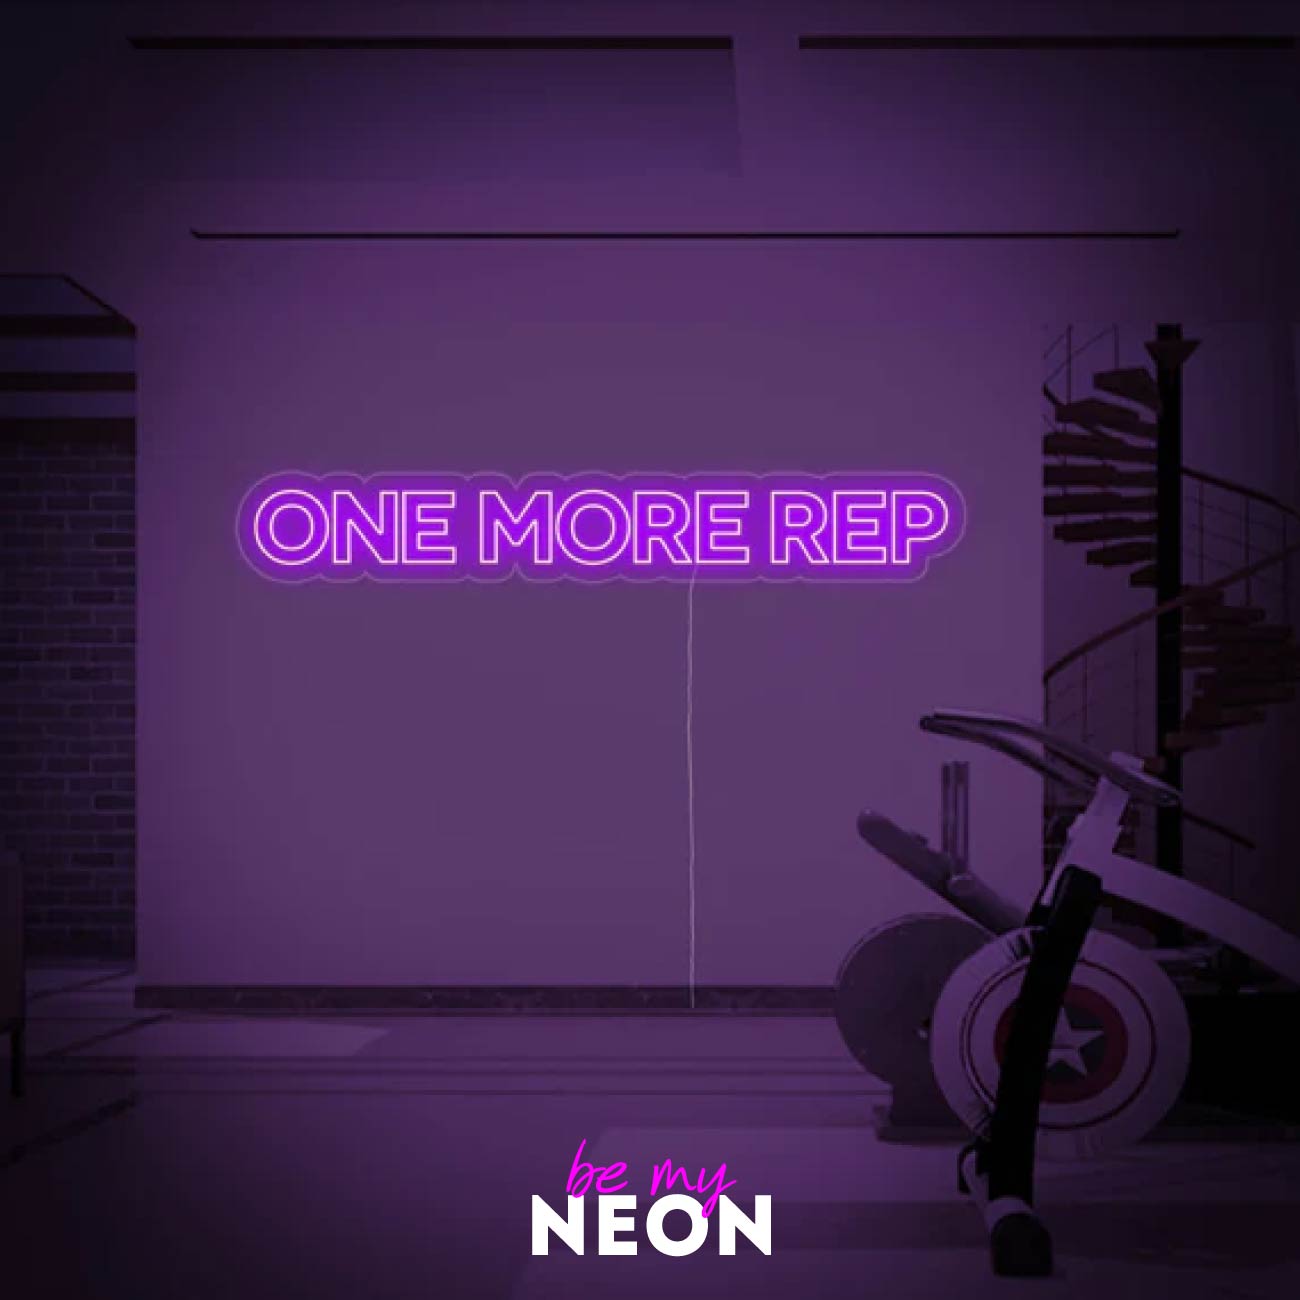 "One More Rep - Gym Fitness" LED Neonschild